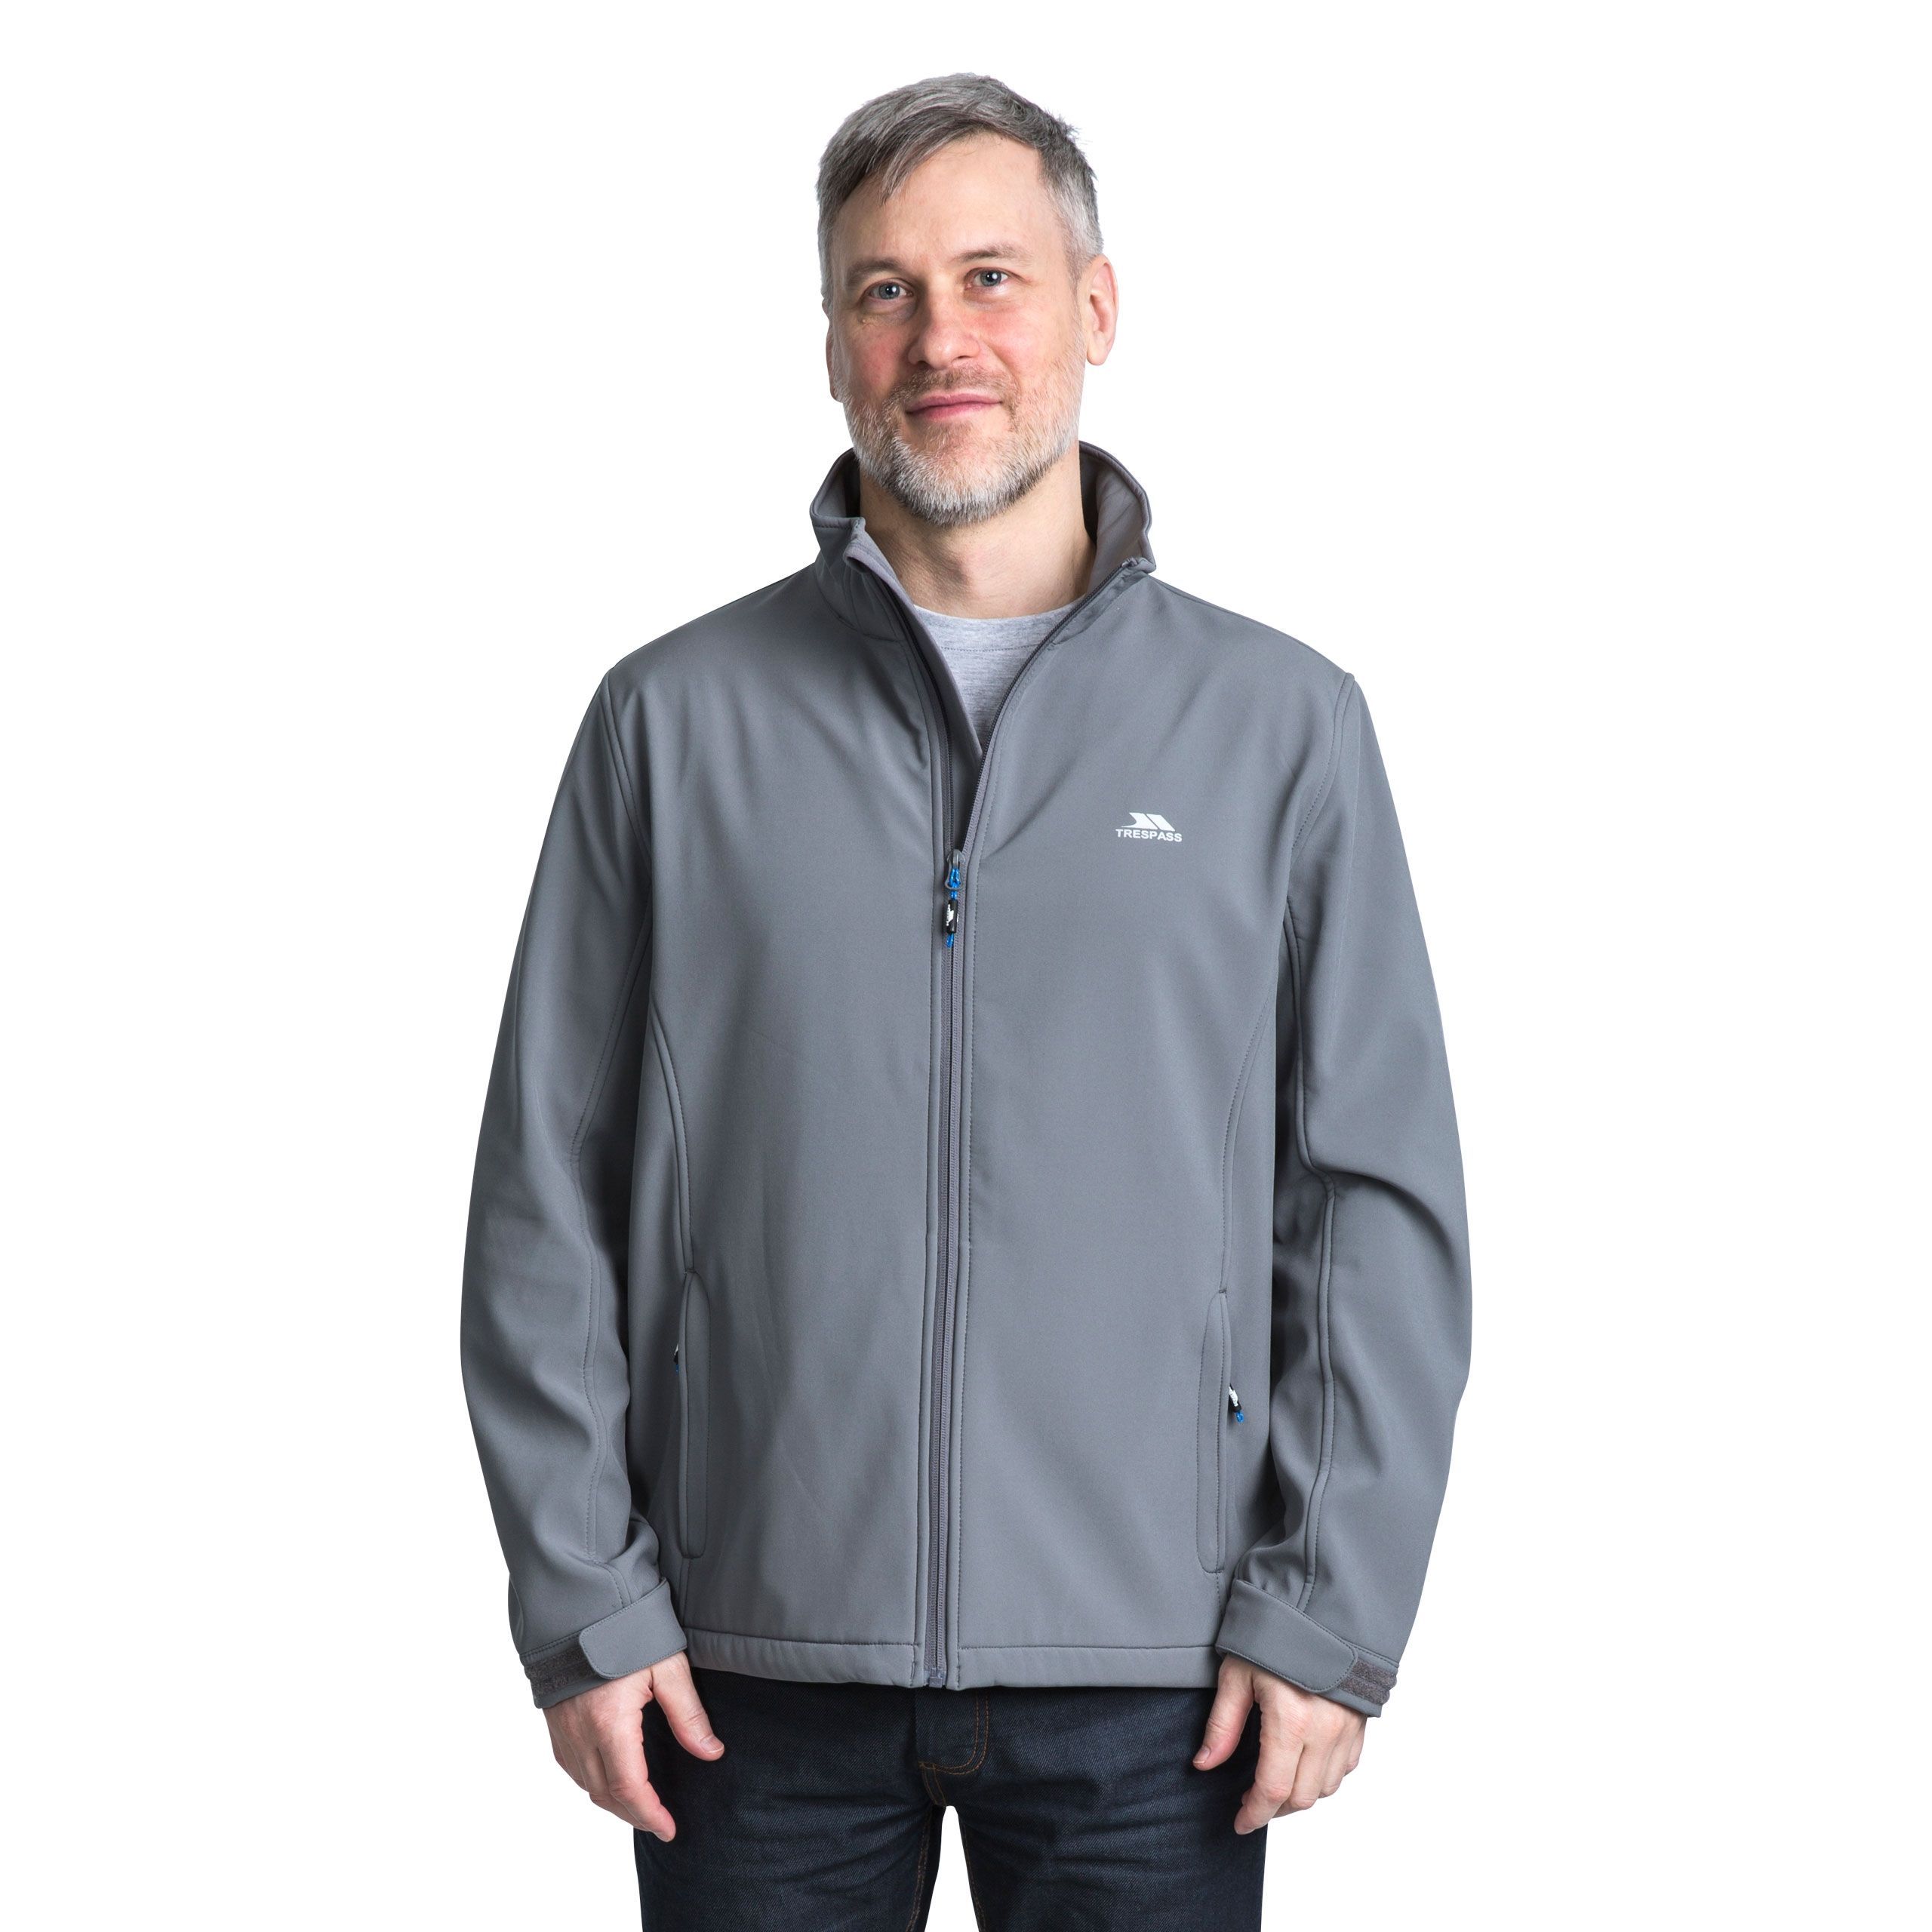 Windproof. Lightweight. 2 Zip Pockets. Drawcord at Hem. Adjustable Flat Cuffs with Tabs.  94% Polyester, 6% Elastane. Trespass Mens Chest Sizing (approx): S - 35-37in/89-94cm, M - 38-40in/96.5-101.5cm, L - 41-43in/104-109cm, XL - 44-46in/111.5-117cm, XXL - 46-48in/117-122cm, 3XL - 48-50in/122-127cm.